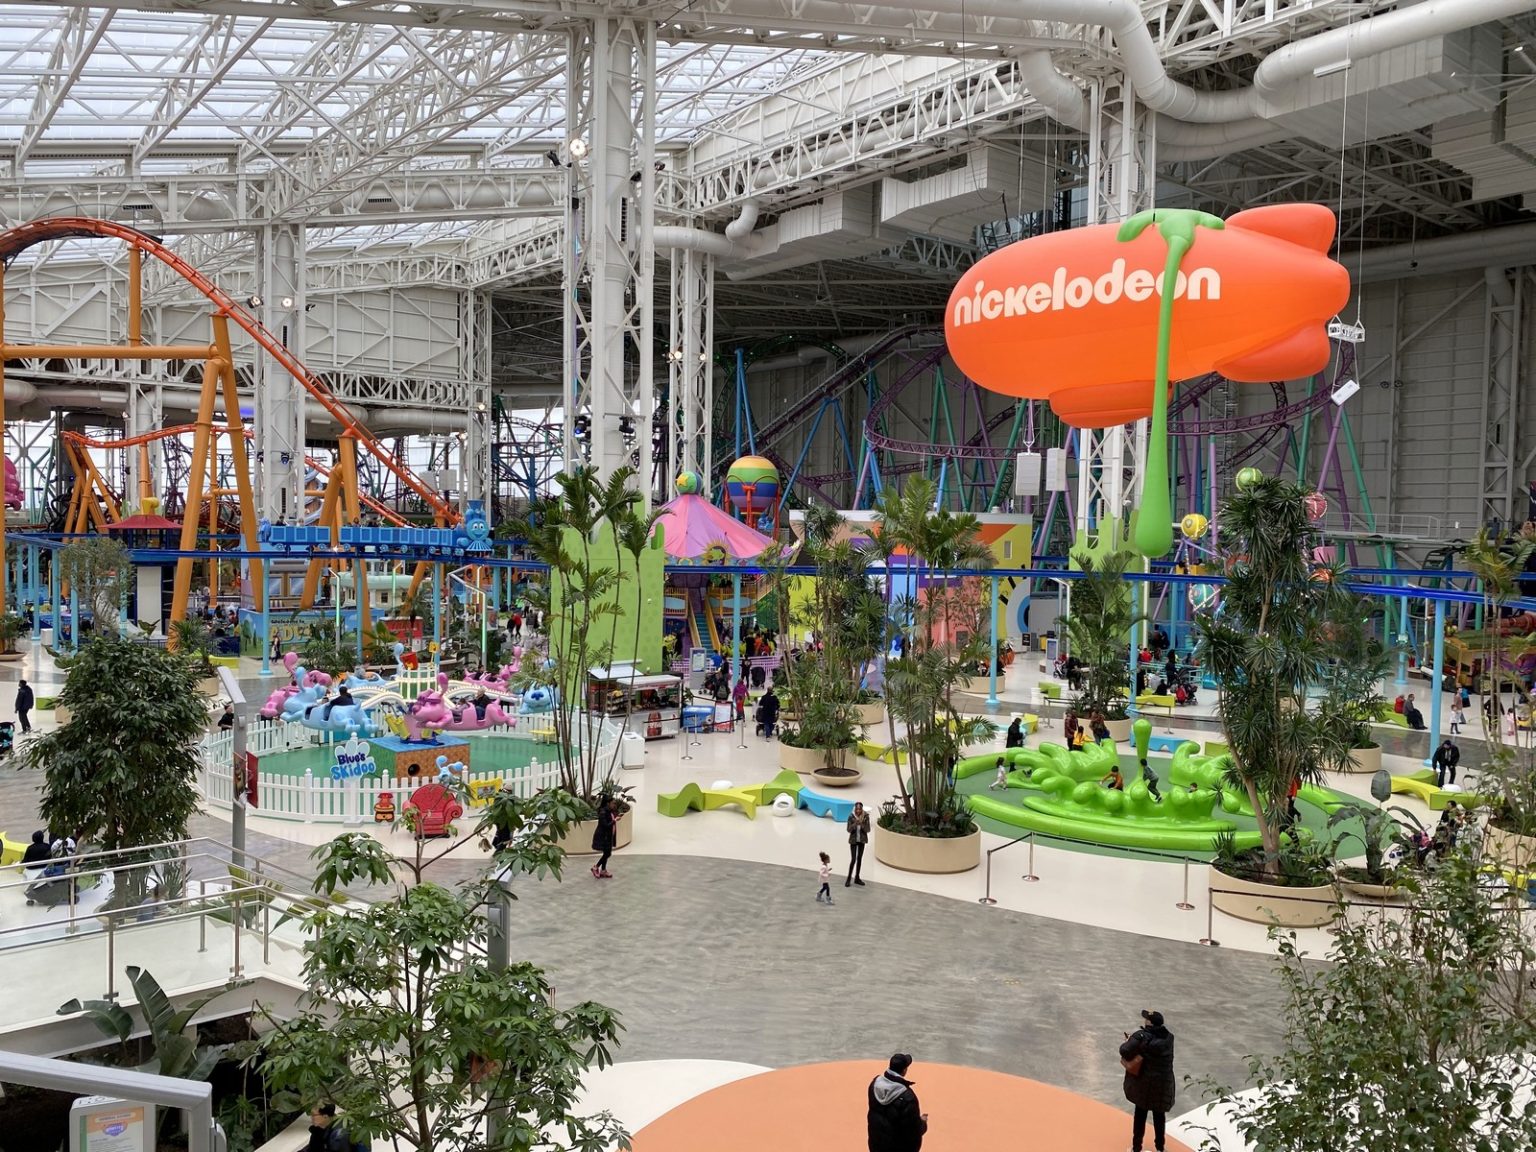 American Dream Mall Review Meadowlands New Jersey 8 1536x1152 